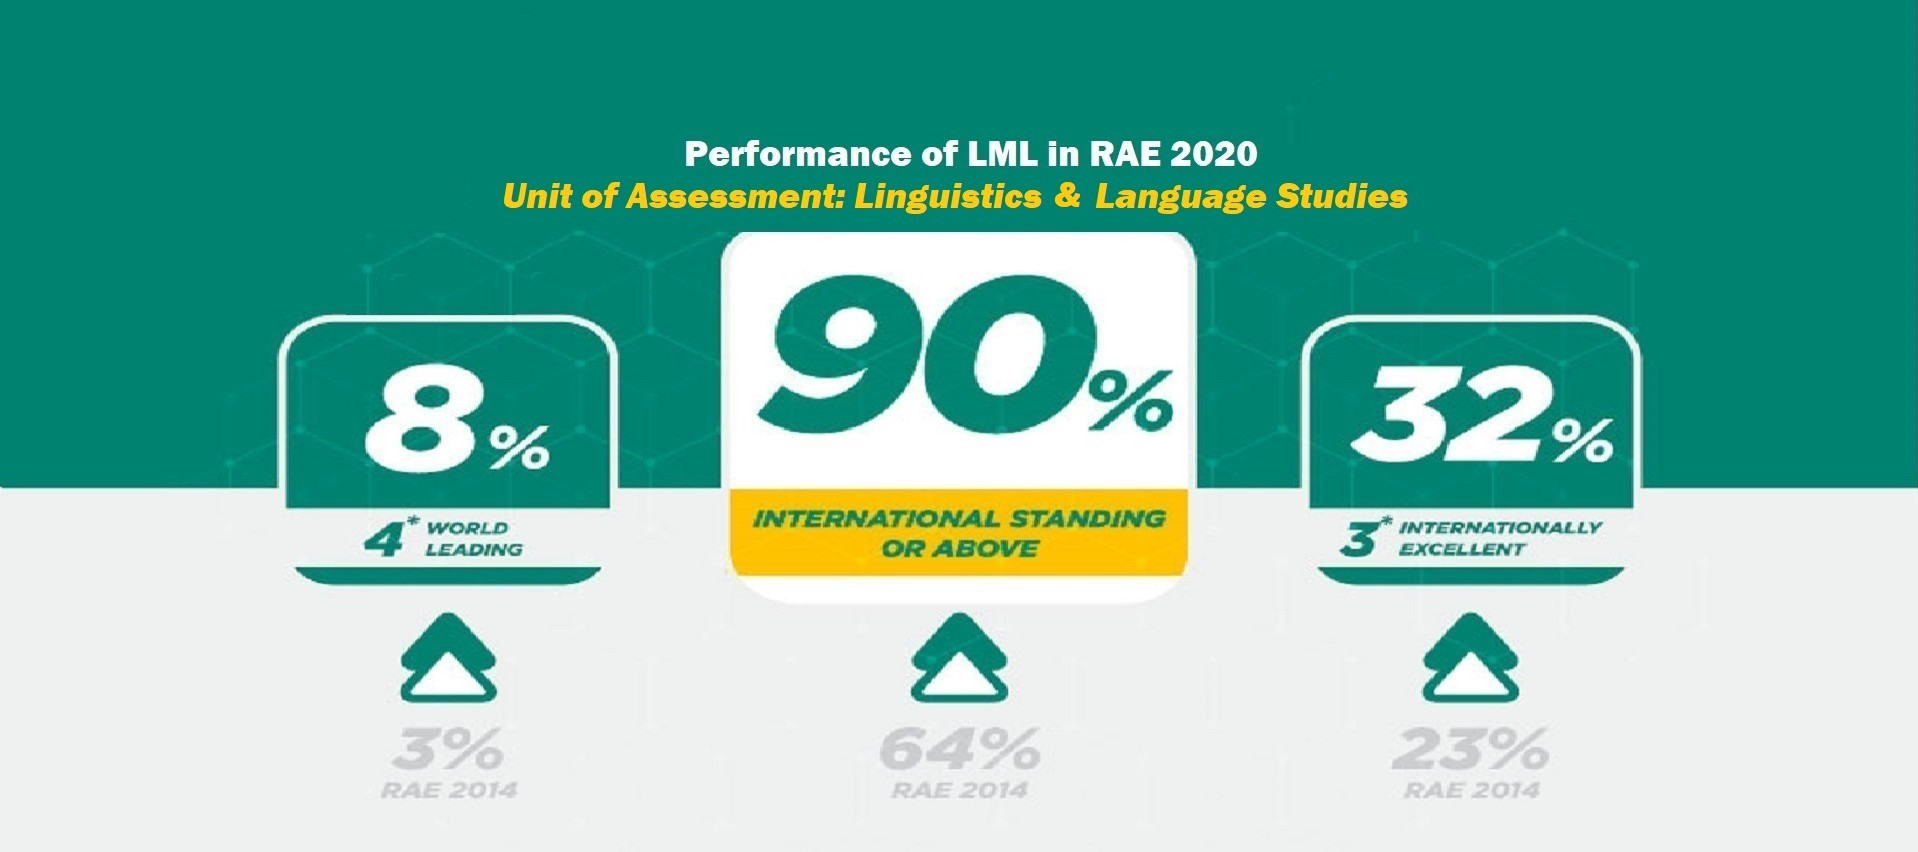 LML makes significant achievements in Research Assessment Exercise (RAE) 2020